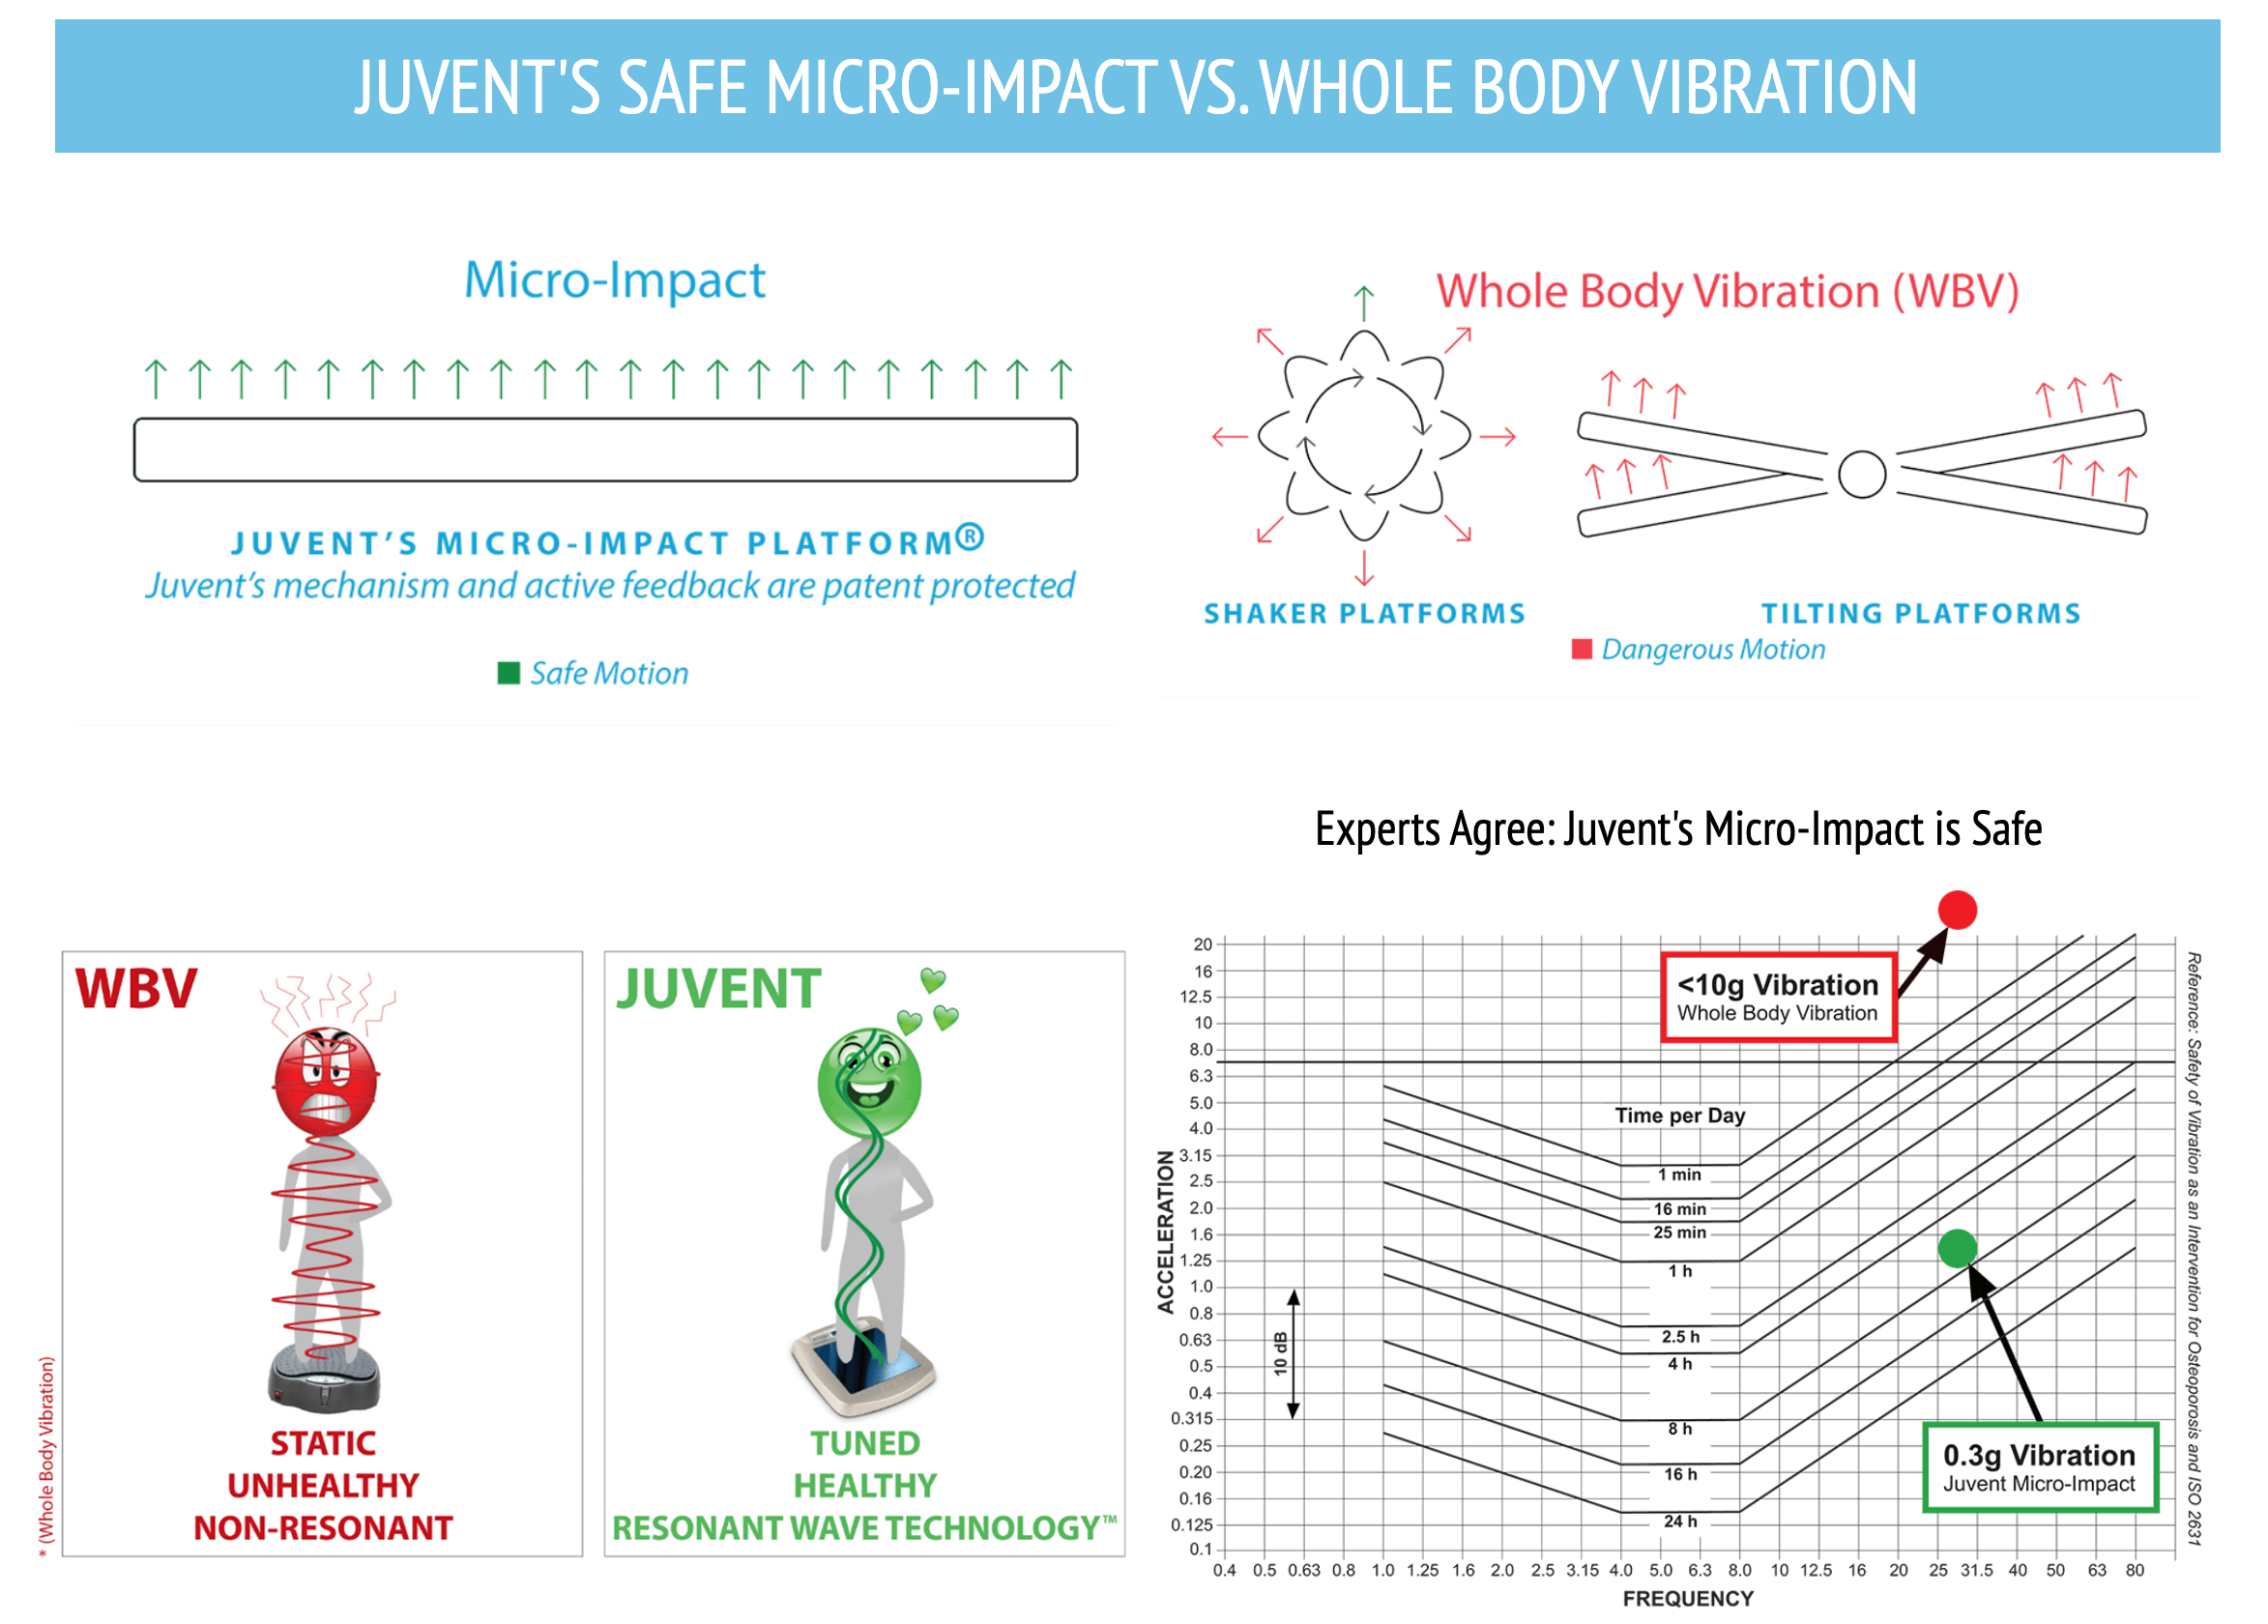 A comparison of Juvent's safe micro-impact and whole body vibration, showing that micro-impact is safer and healthier.